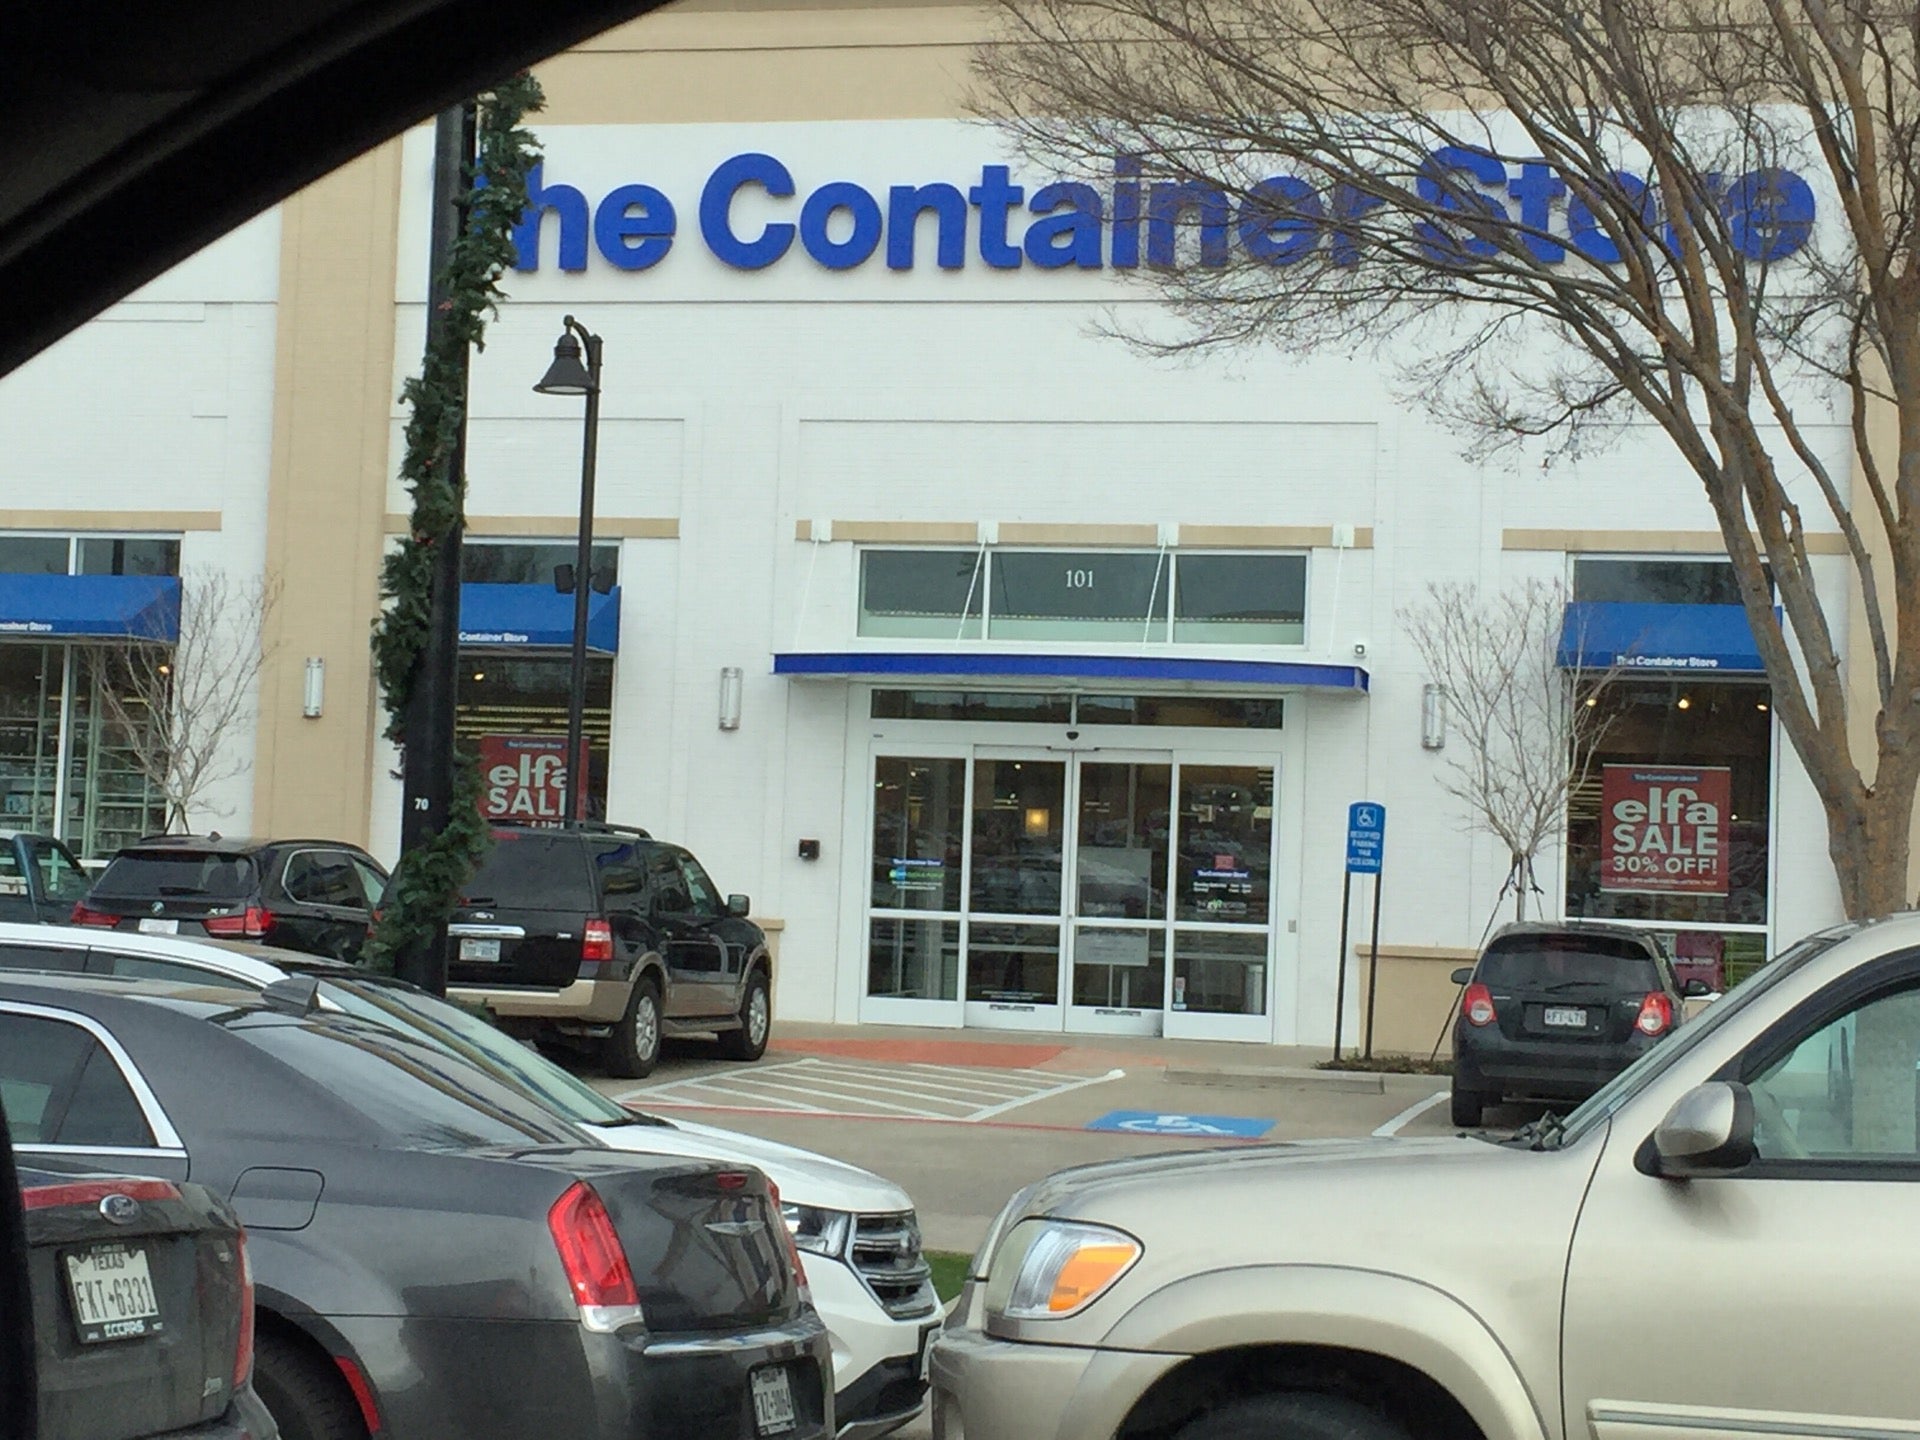 The Container Store - Arlington Highlands